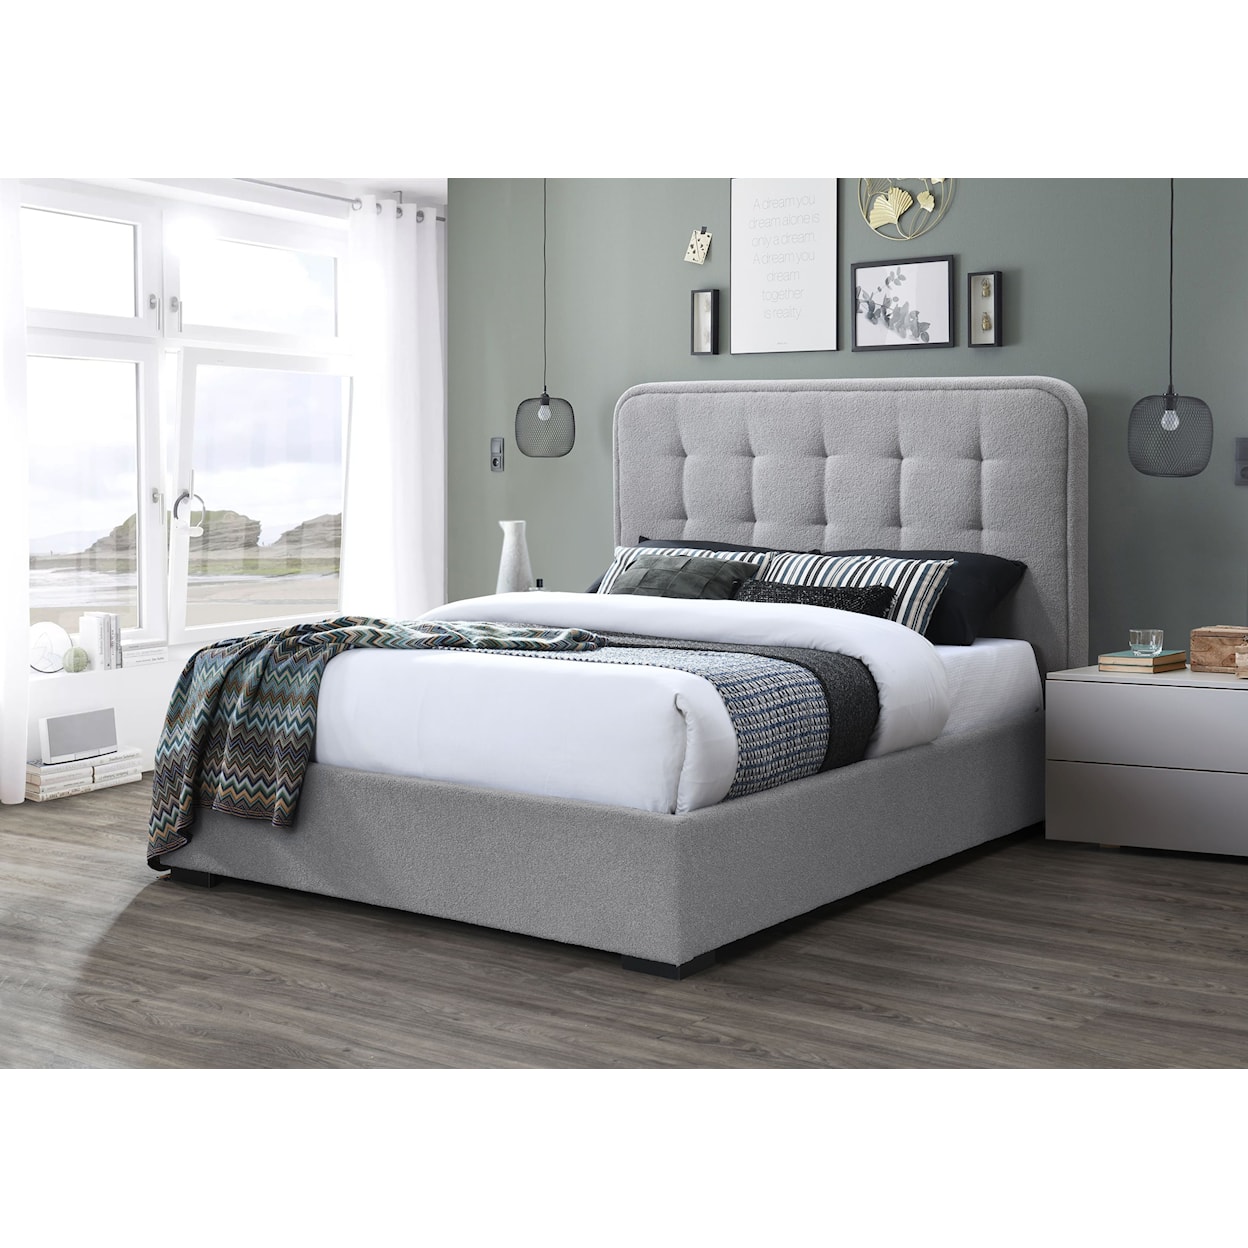 Lifestyle 9434A Upholstered Bed - King